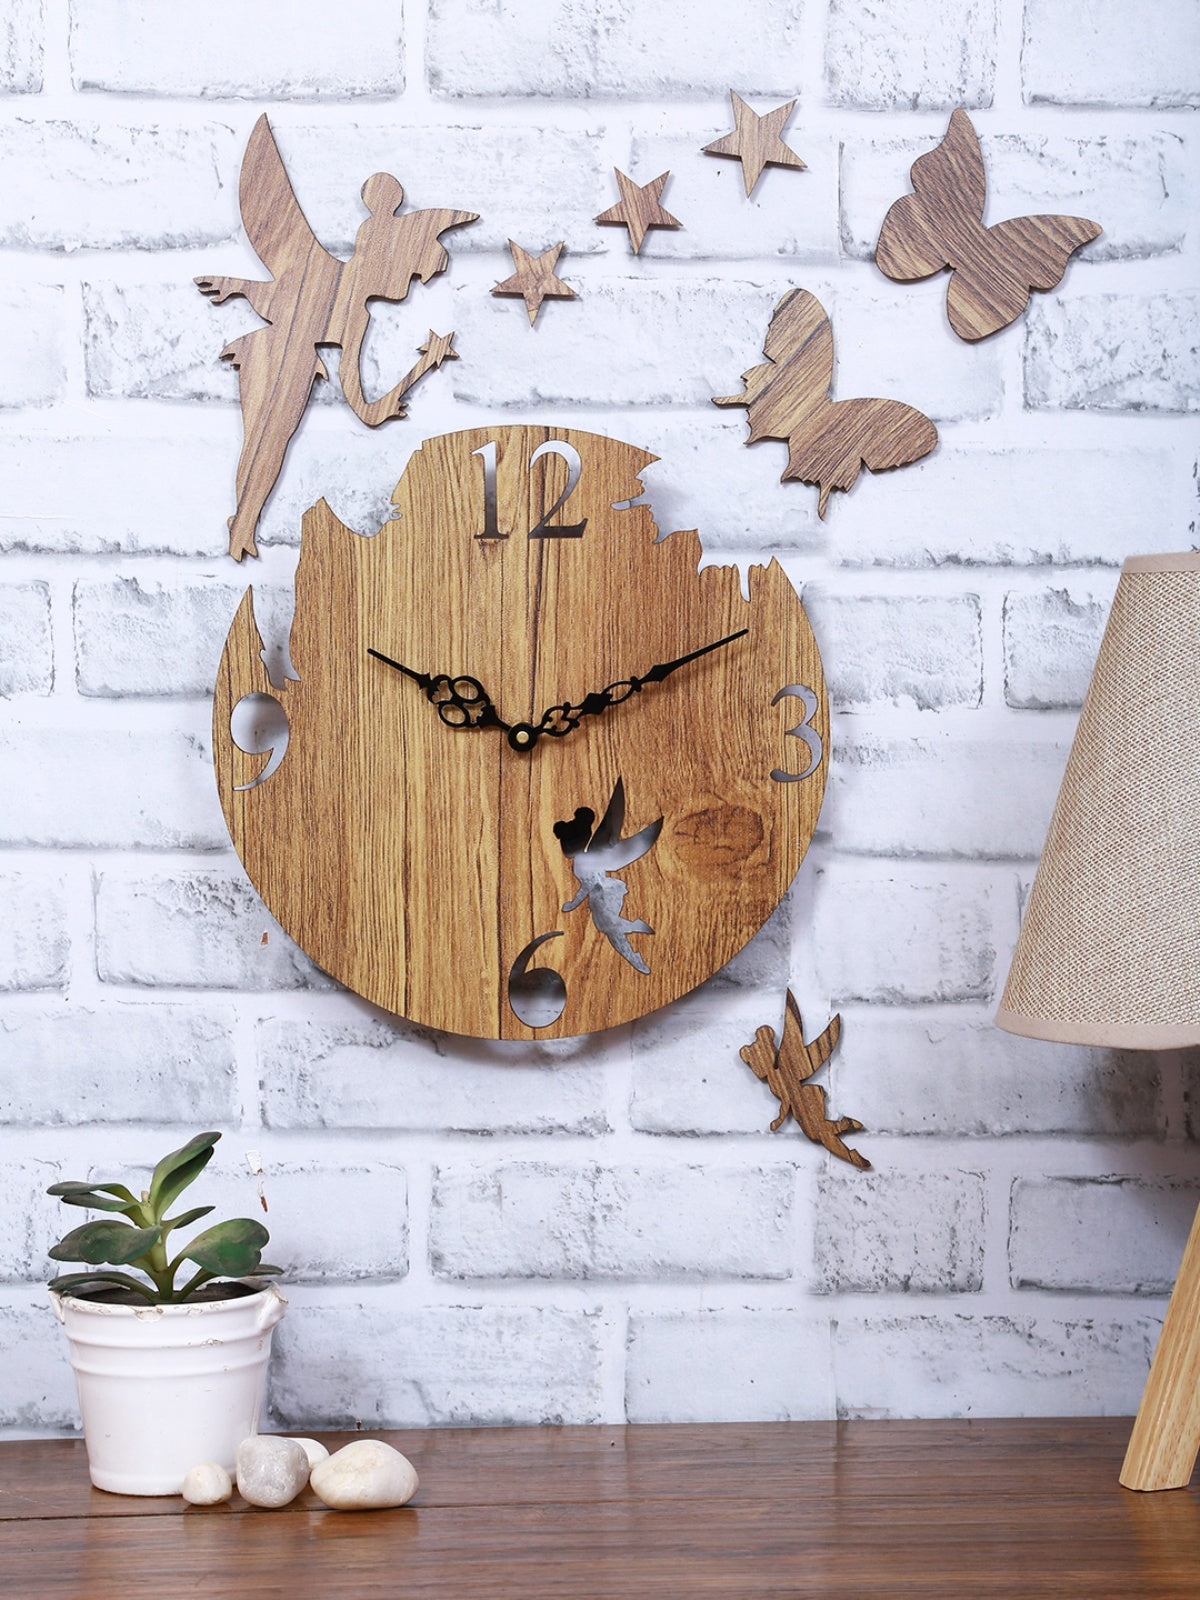 Butterfly Designer Wooden Wall Clock for Home, Beige